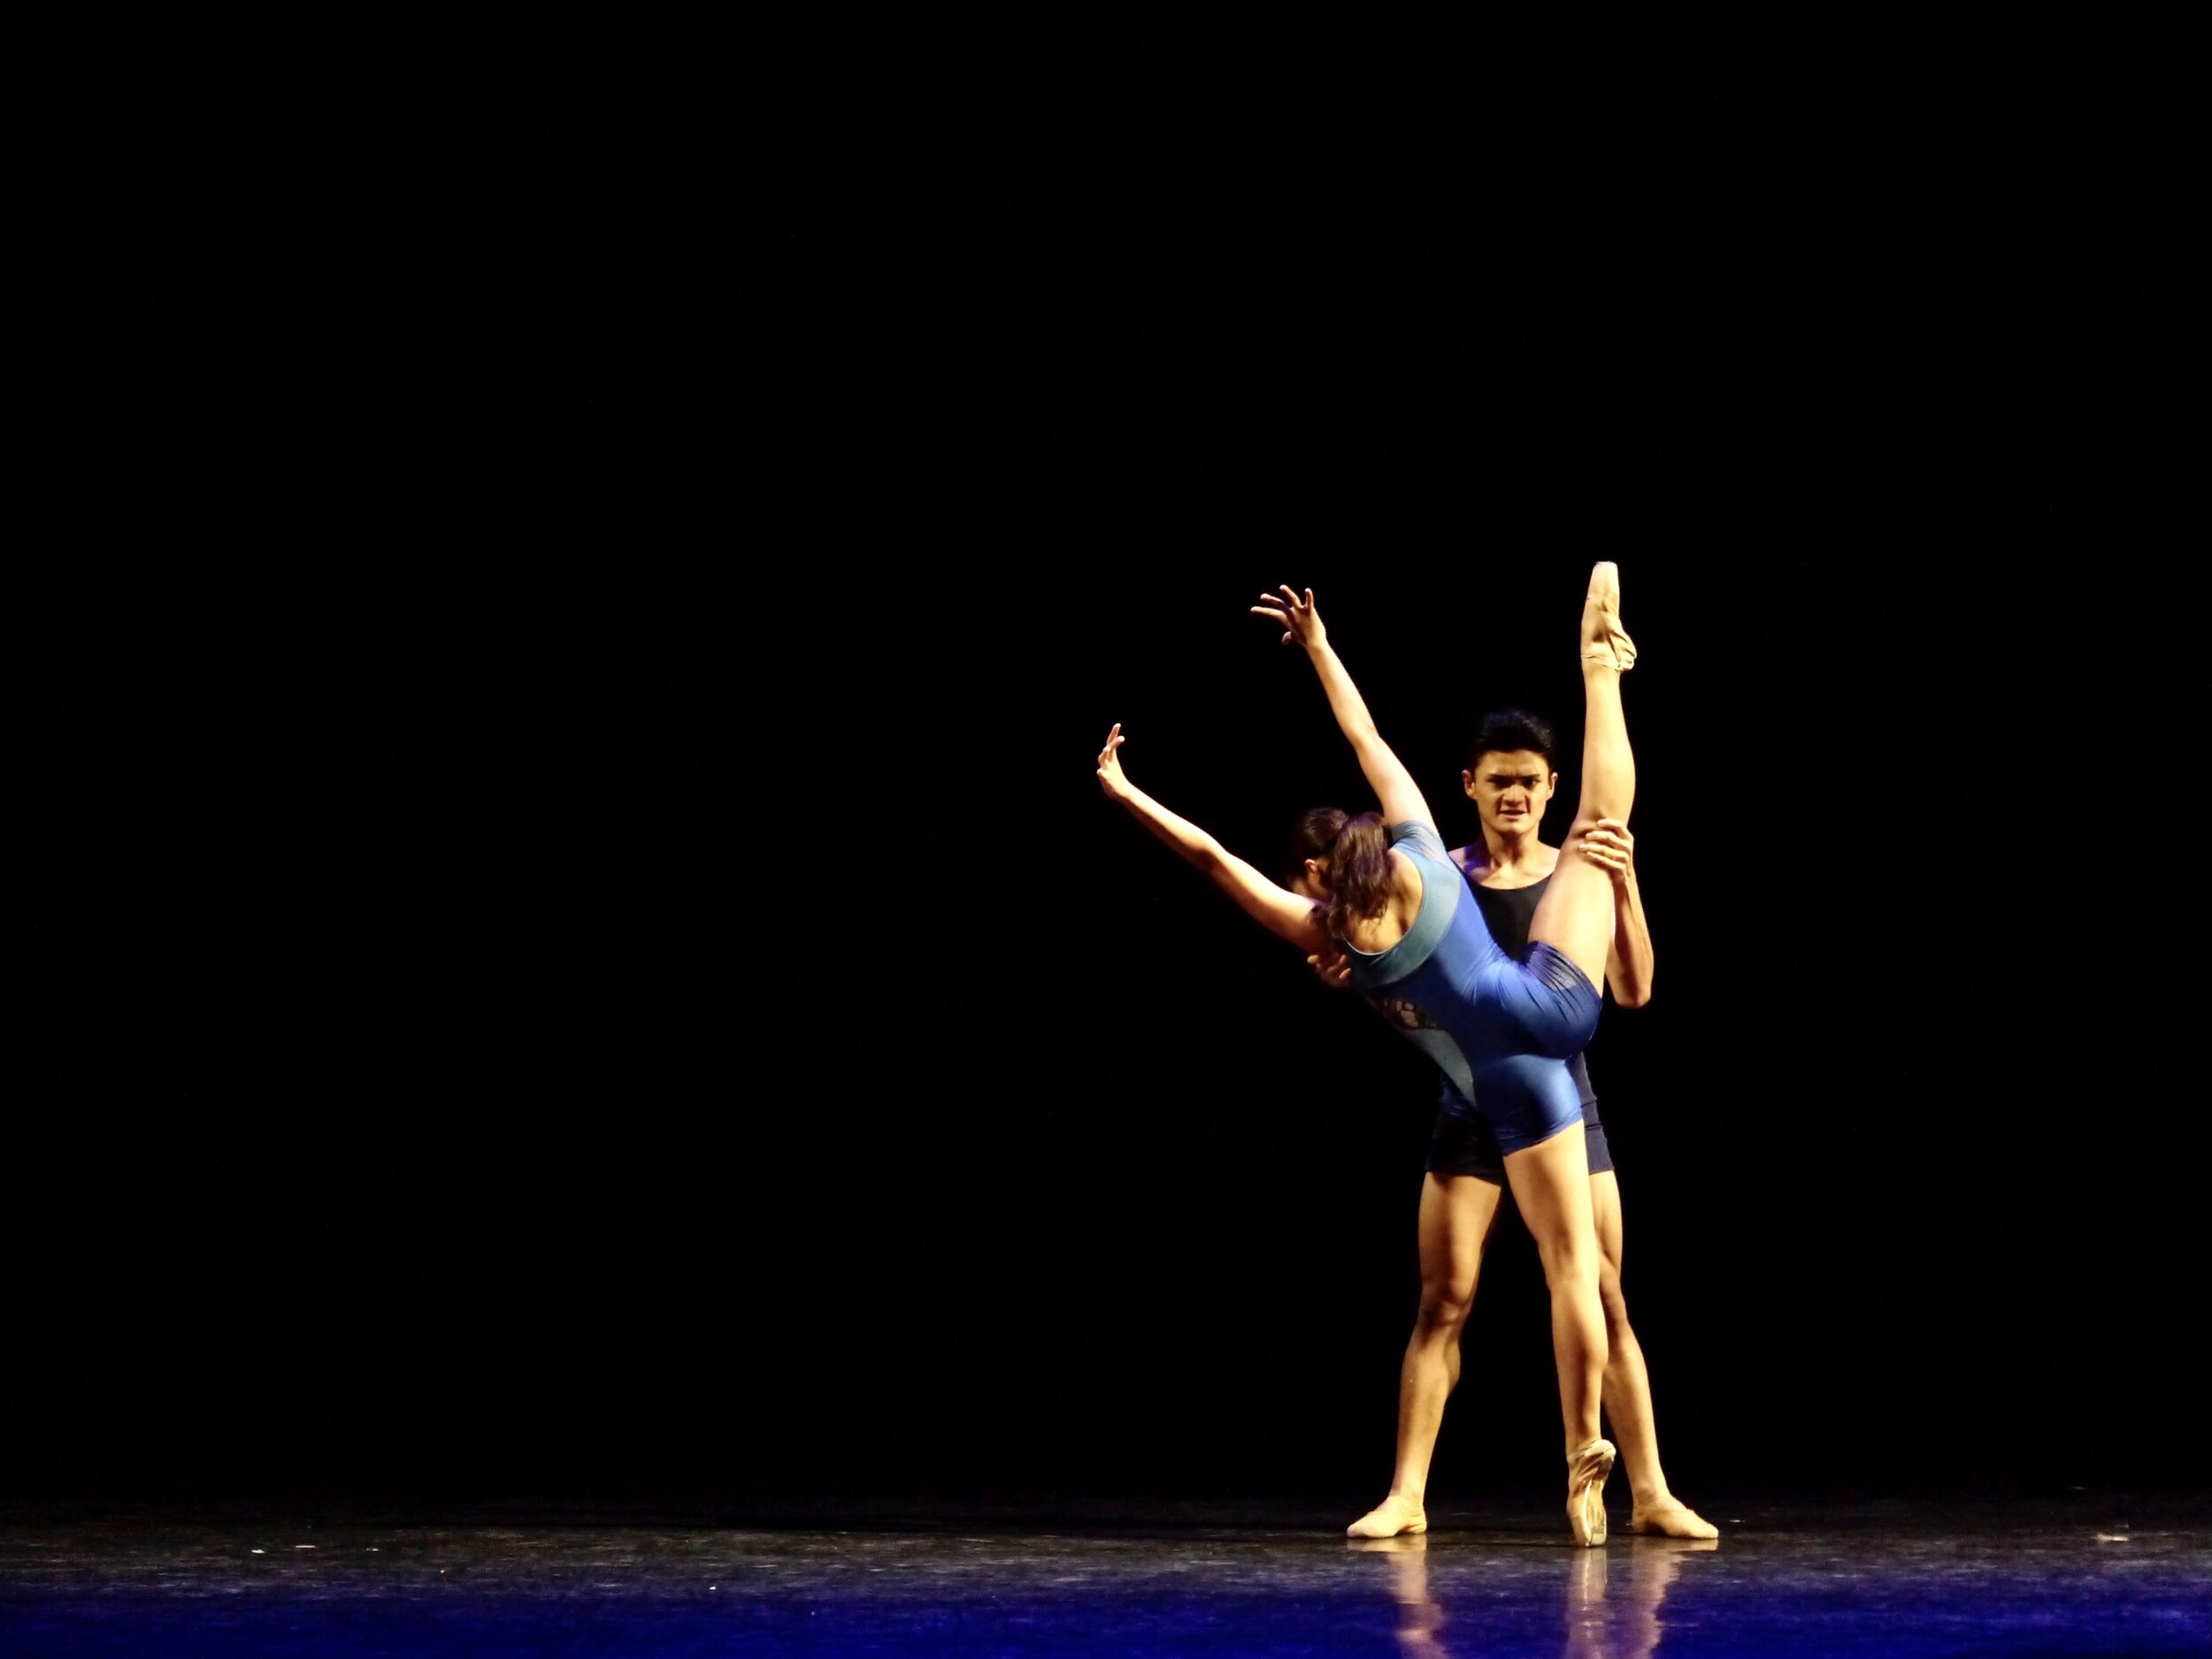    Wearing complementing outfits in marine hues, Joshua Enciso and Nicole Barroso power through the vigorous steps of Gerardo Francisco’s  Fuga . The pair danced  Fuga  as a competition piece in the USA-IBC and in Ballet Manila’s  Iconic  (above), bo